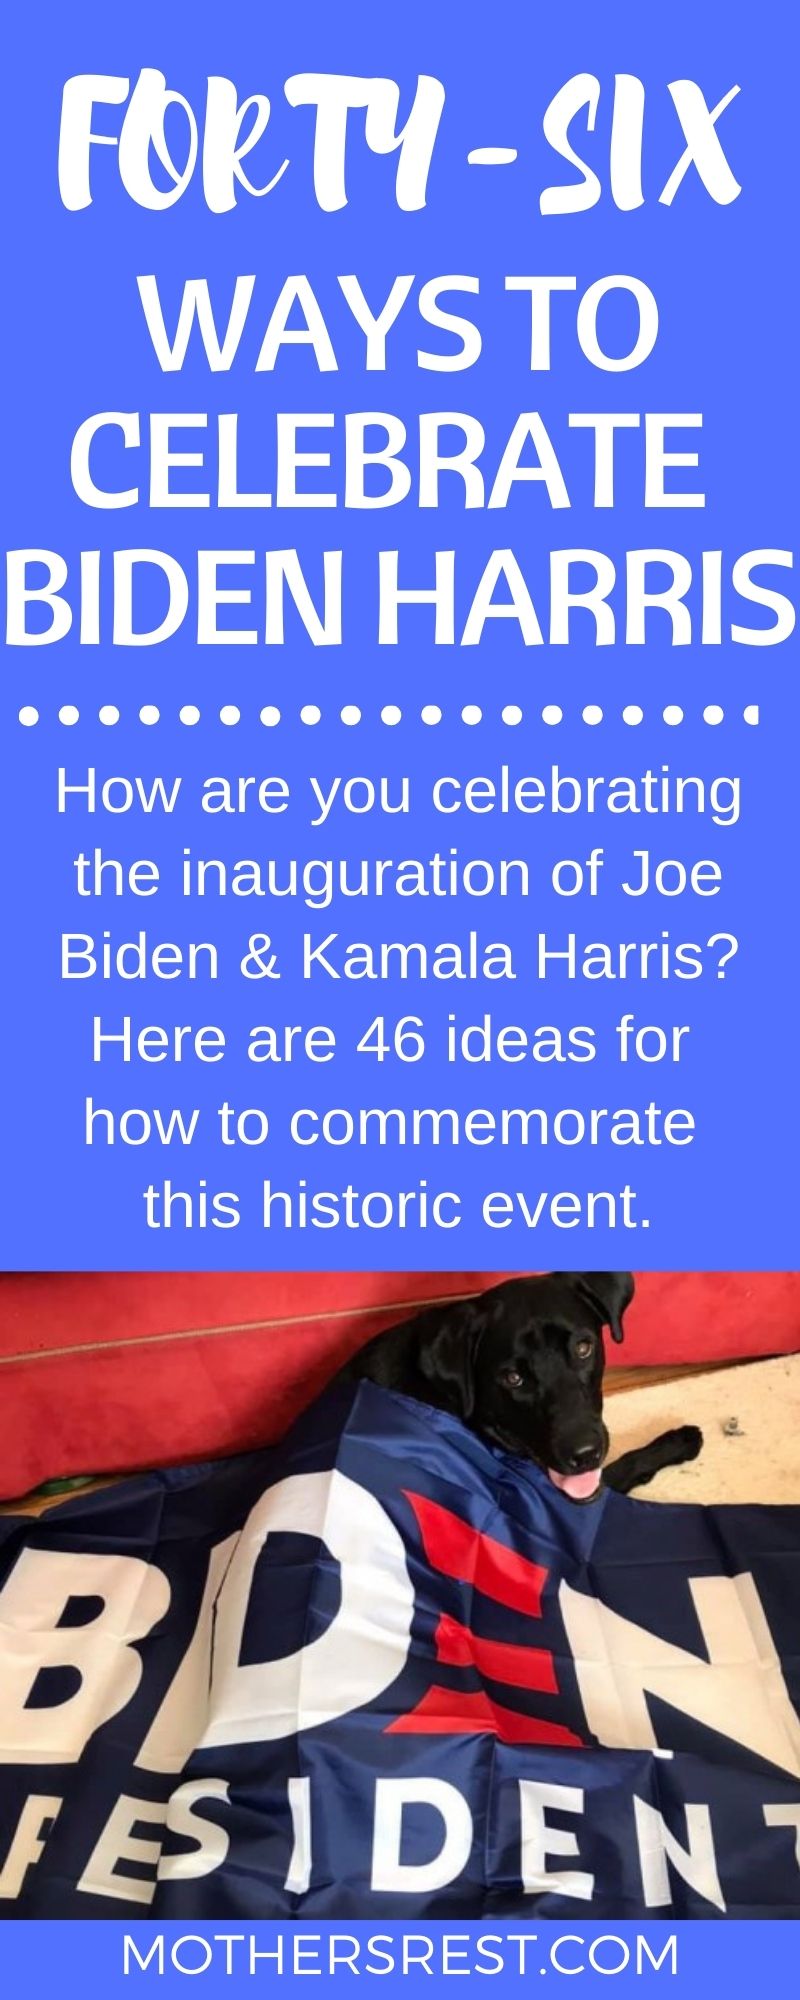 How are you celebrating the inauguration of Joe Biden and Kamala Harris? Here are 46 ideas for how to commemorate this historic event.